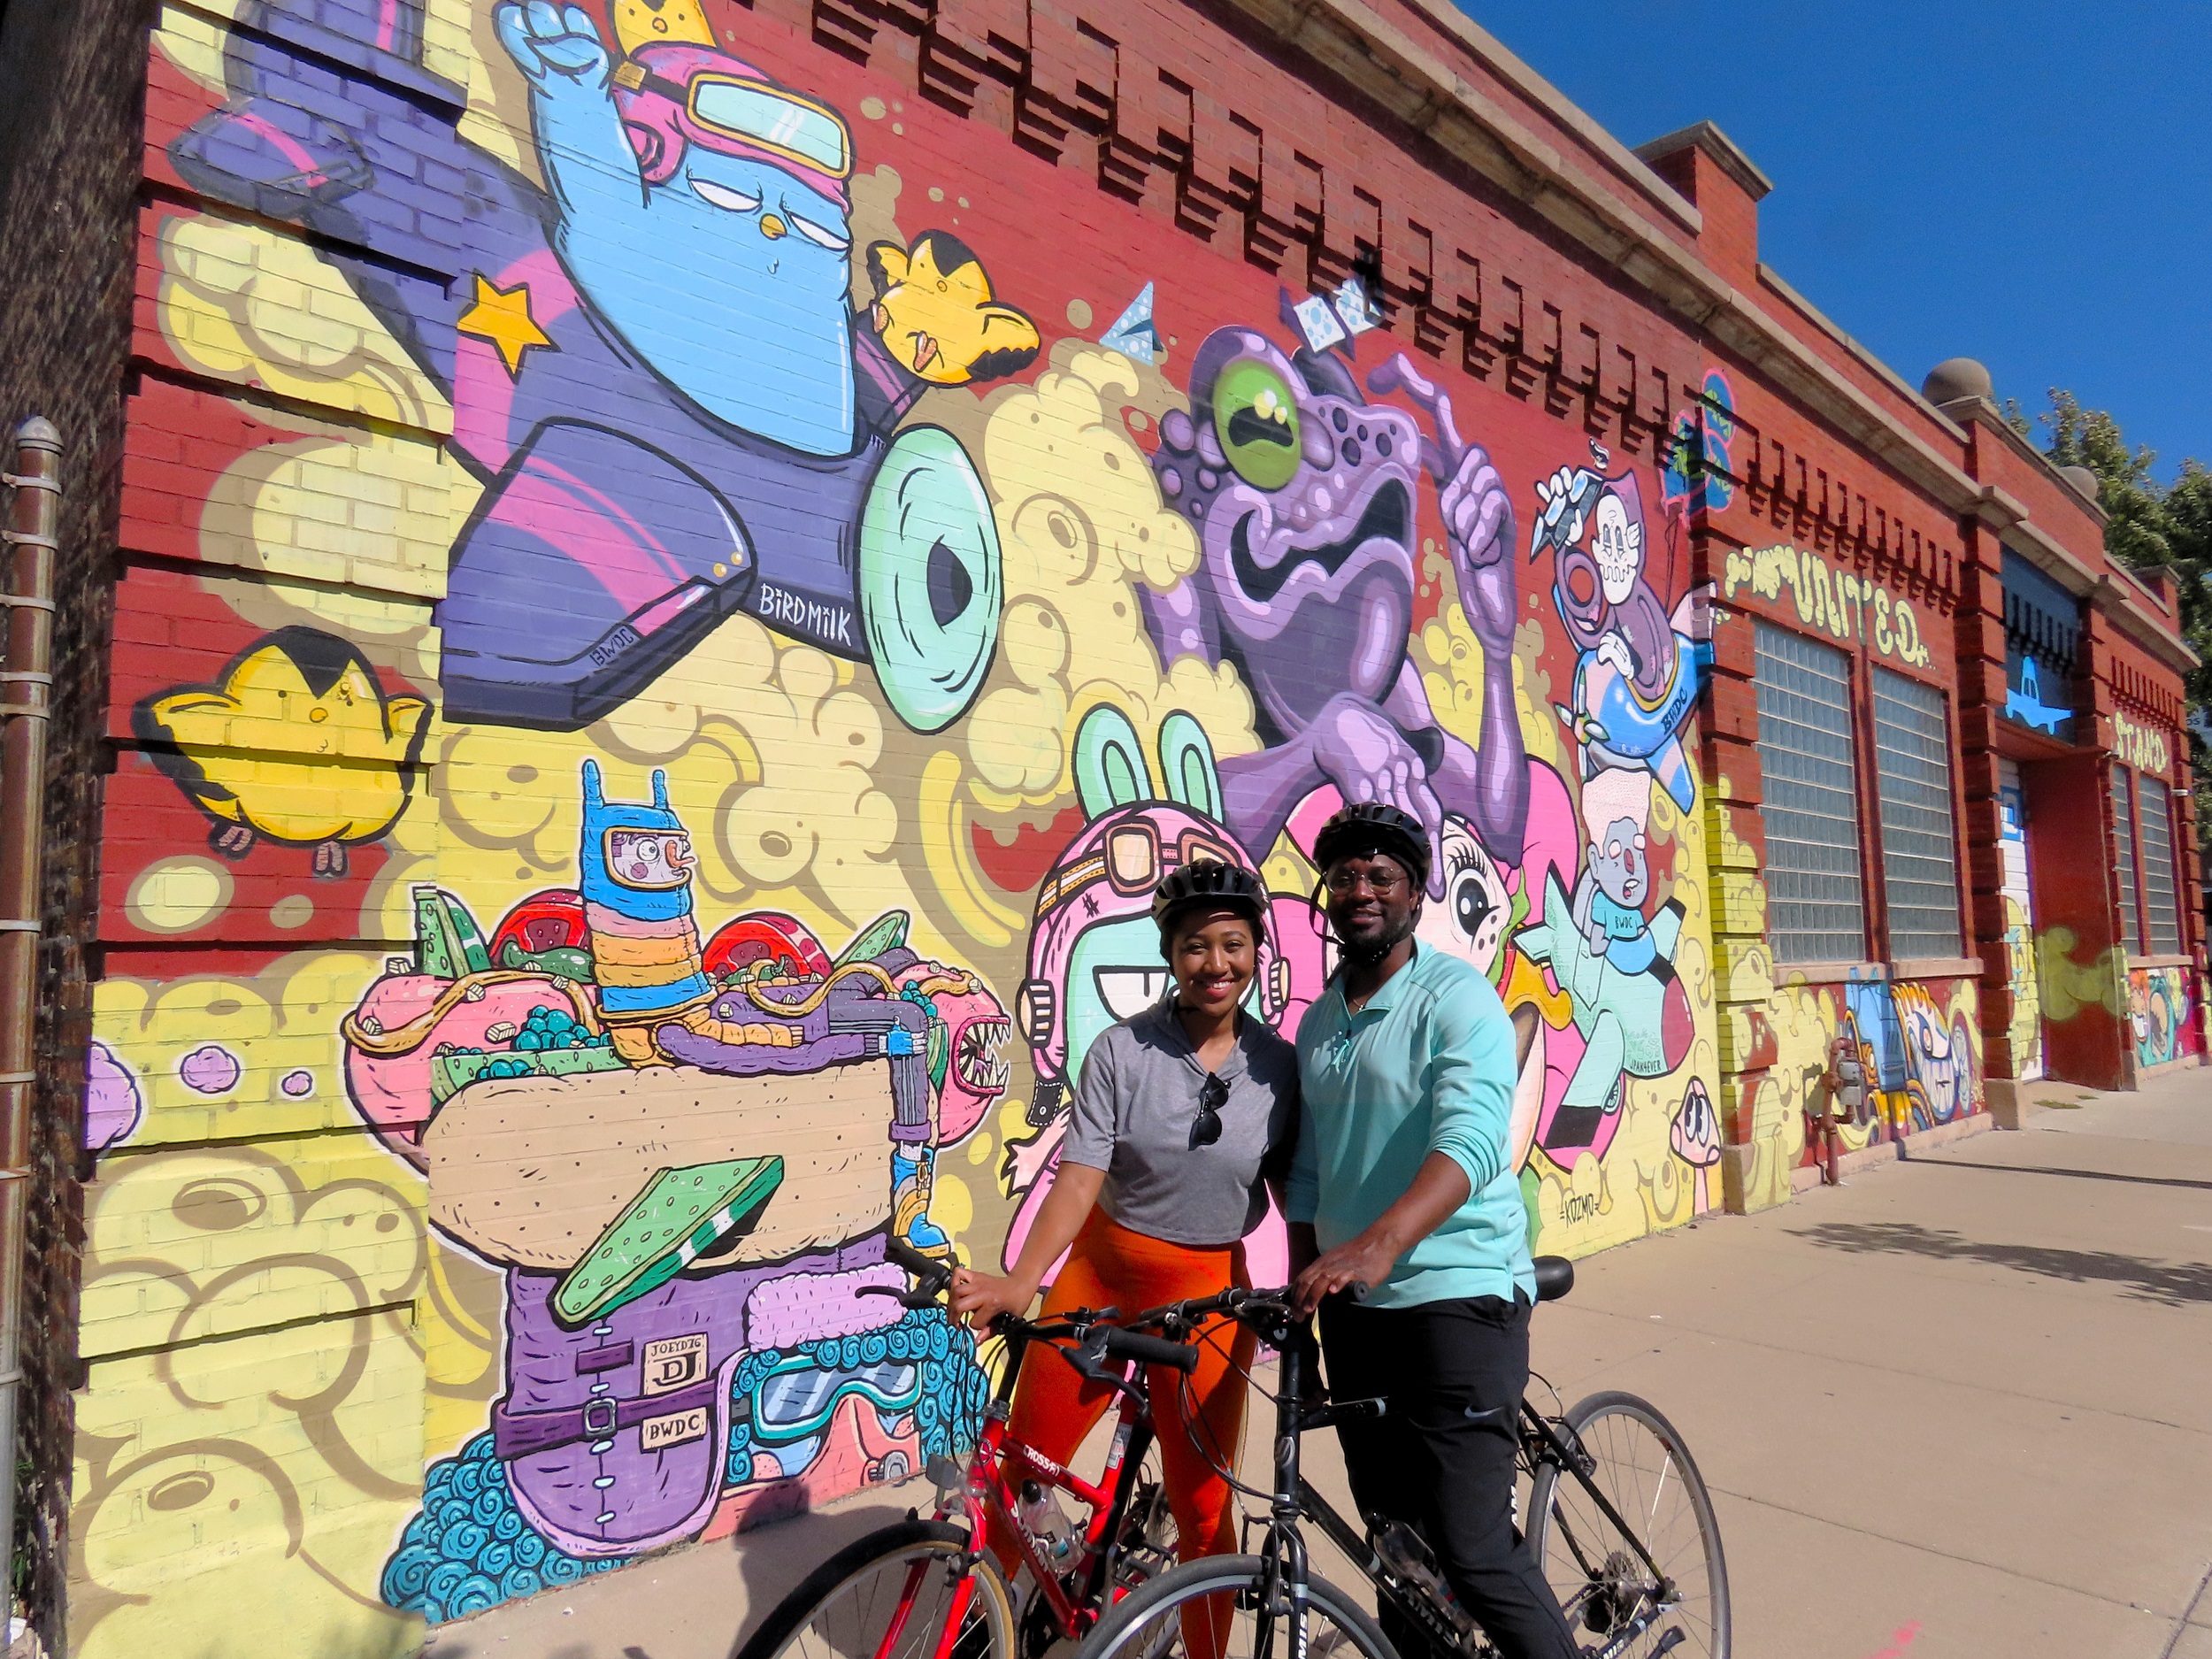 Two CBA riders arm in arm in front of colorful cartoon style street art on a red brick wall.